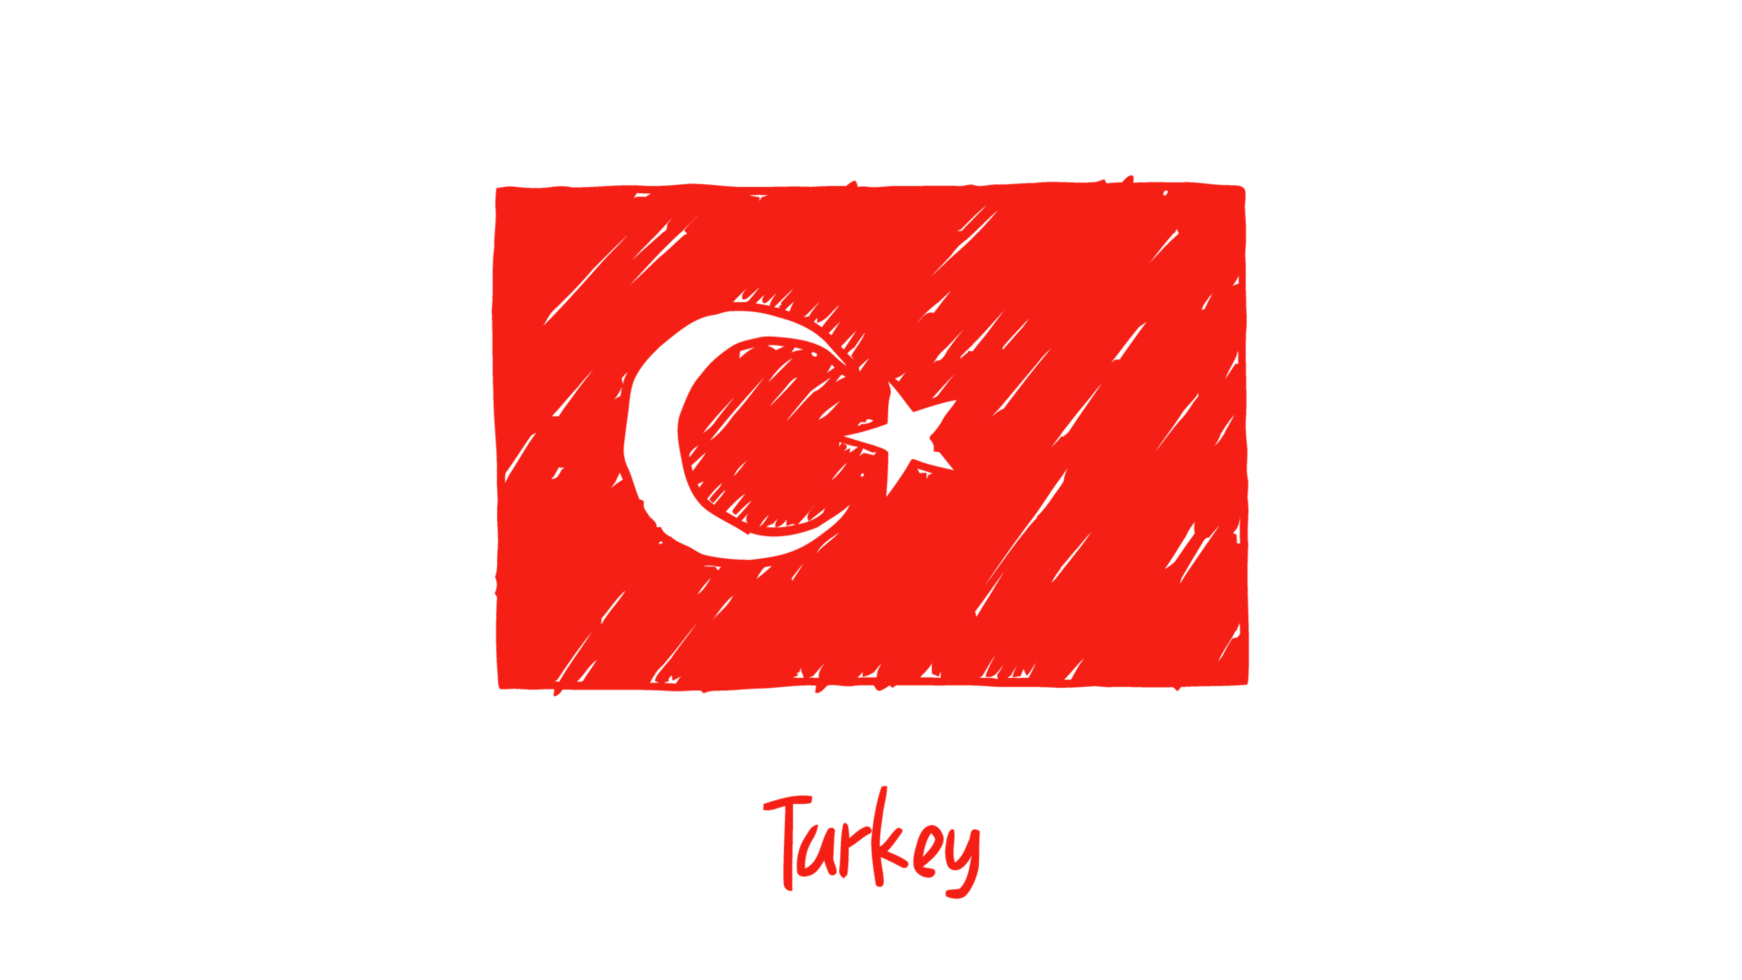 Turkey National Country Flag Pencil Color Sketch Illustration with Transparent Background png